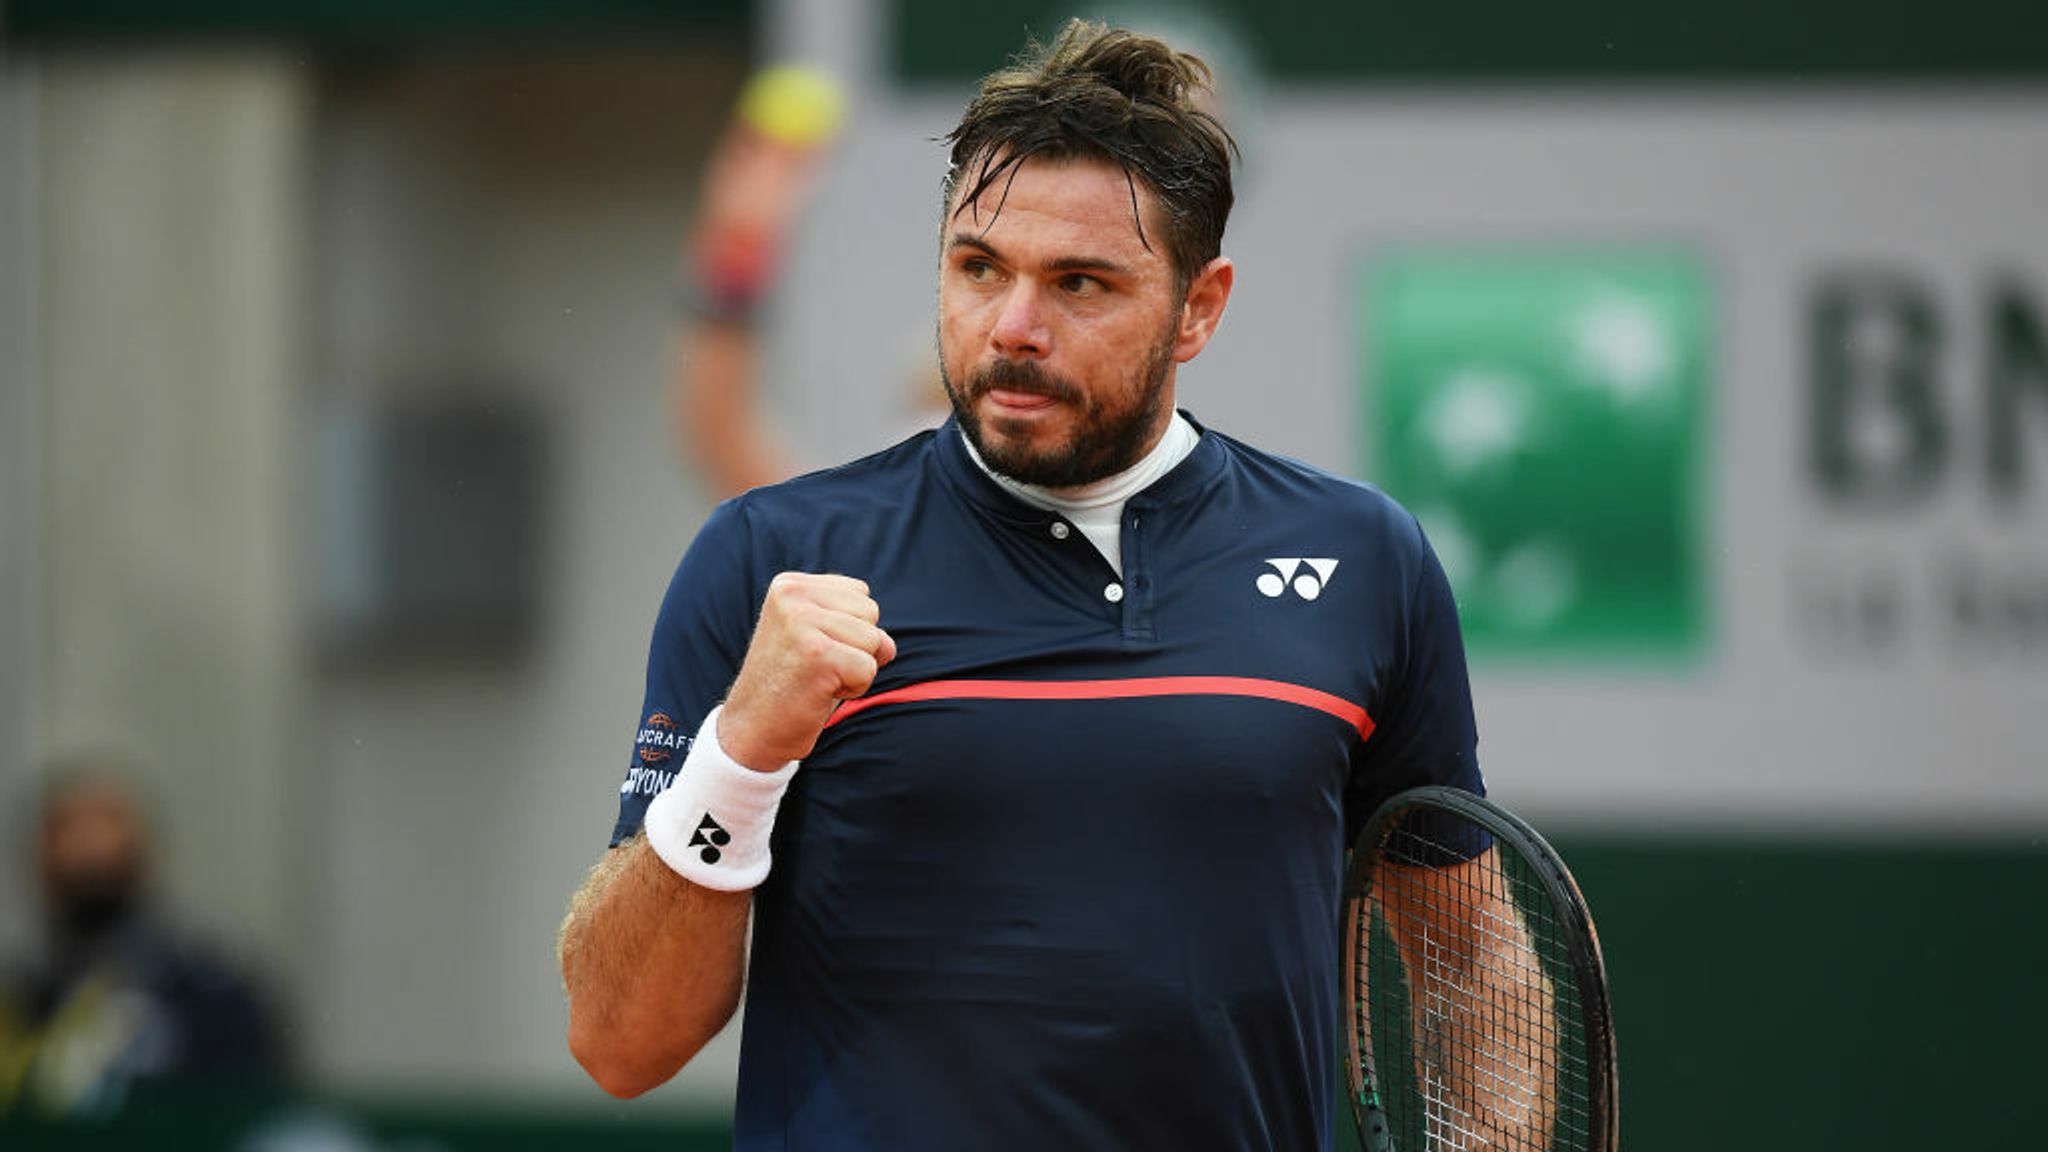 Stan Wawrinka has potential and experience to win another Grand Slam, says Dani Vallverdu Tennis News Sky Sports